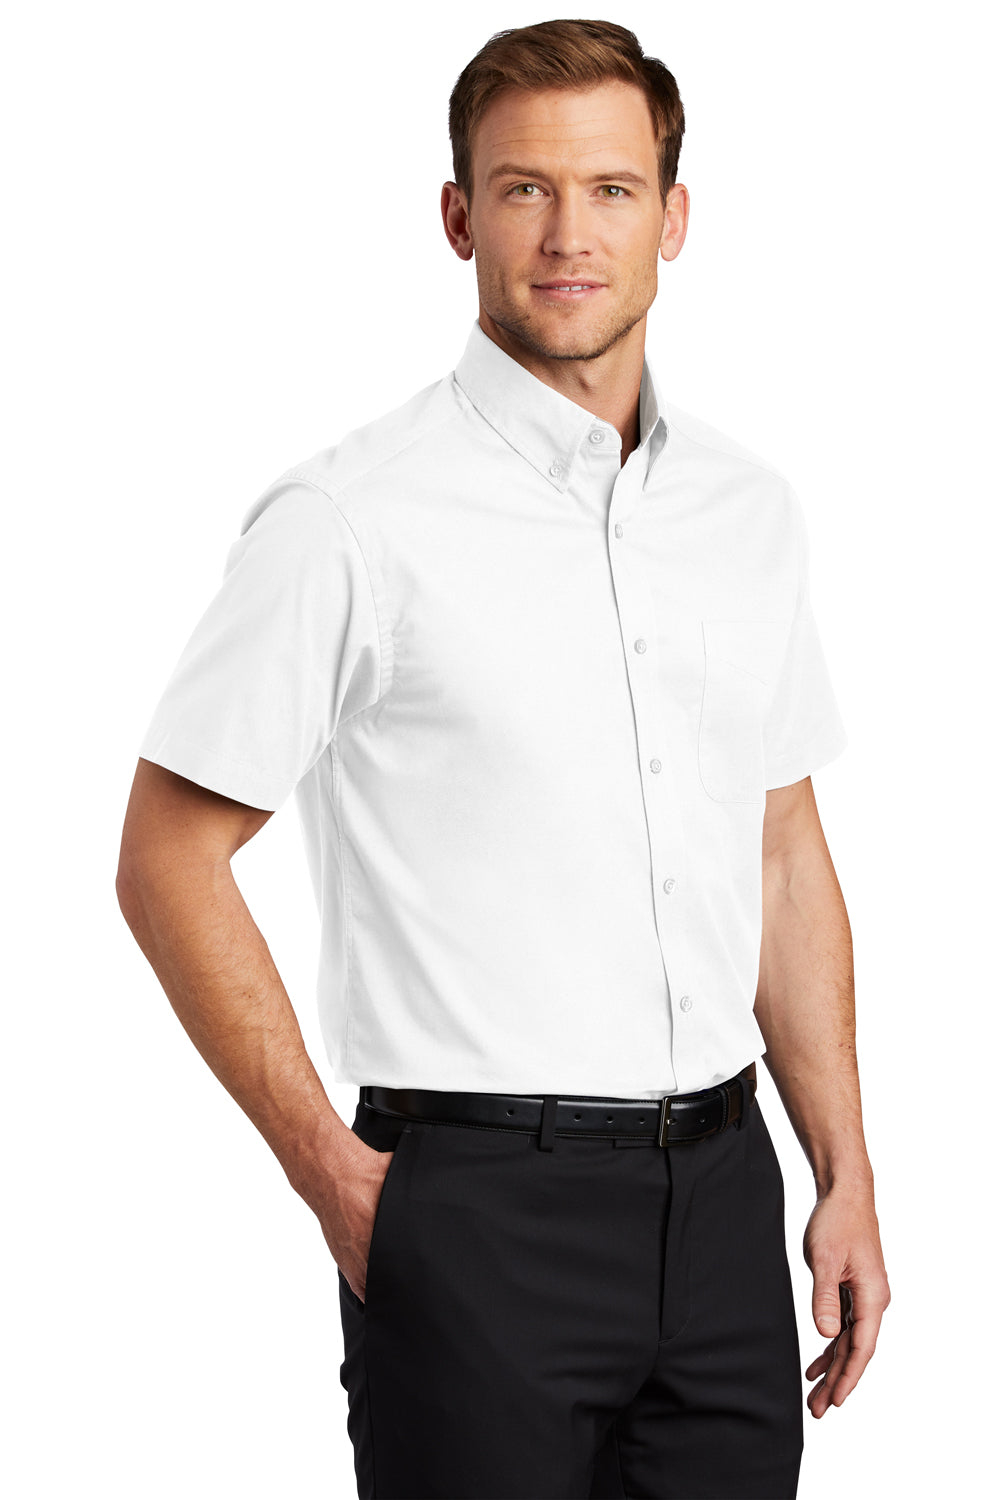 Port Authority S508/TLS508 Mens Easy Care Wrinkle Resistant Short Sleeve Button Down Shirt w/ Pocket White 3Q